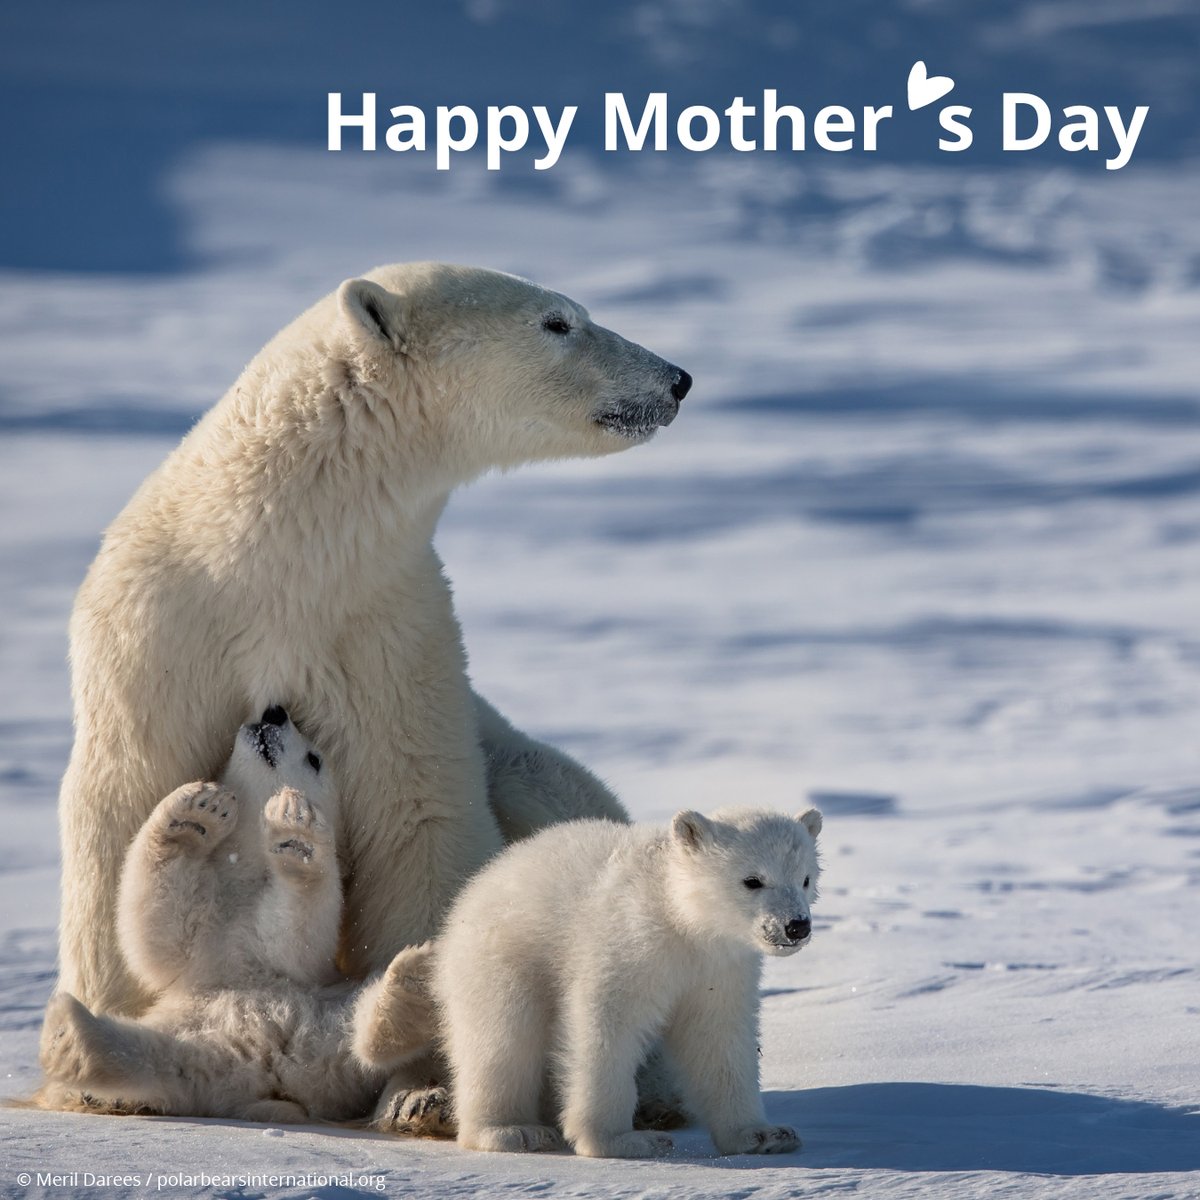 Wishing the mothers and mother-figures of the world, polar bears and humans alike, the very best today! 💙